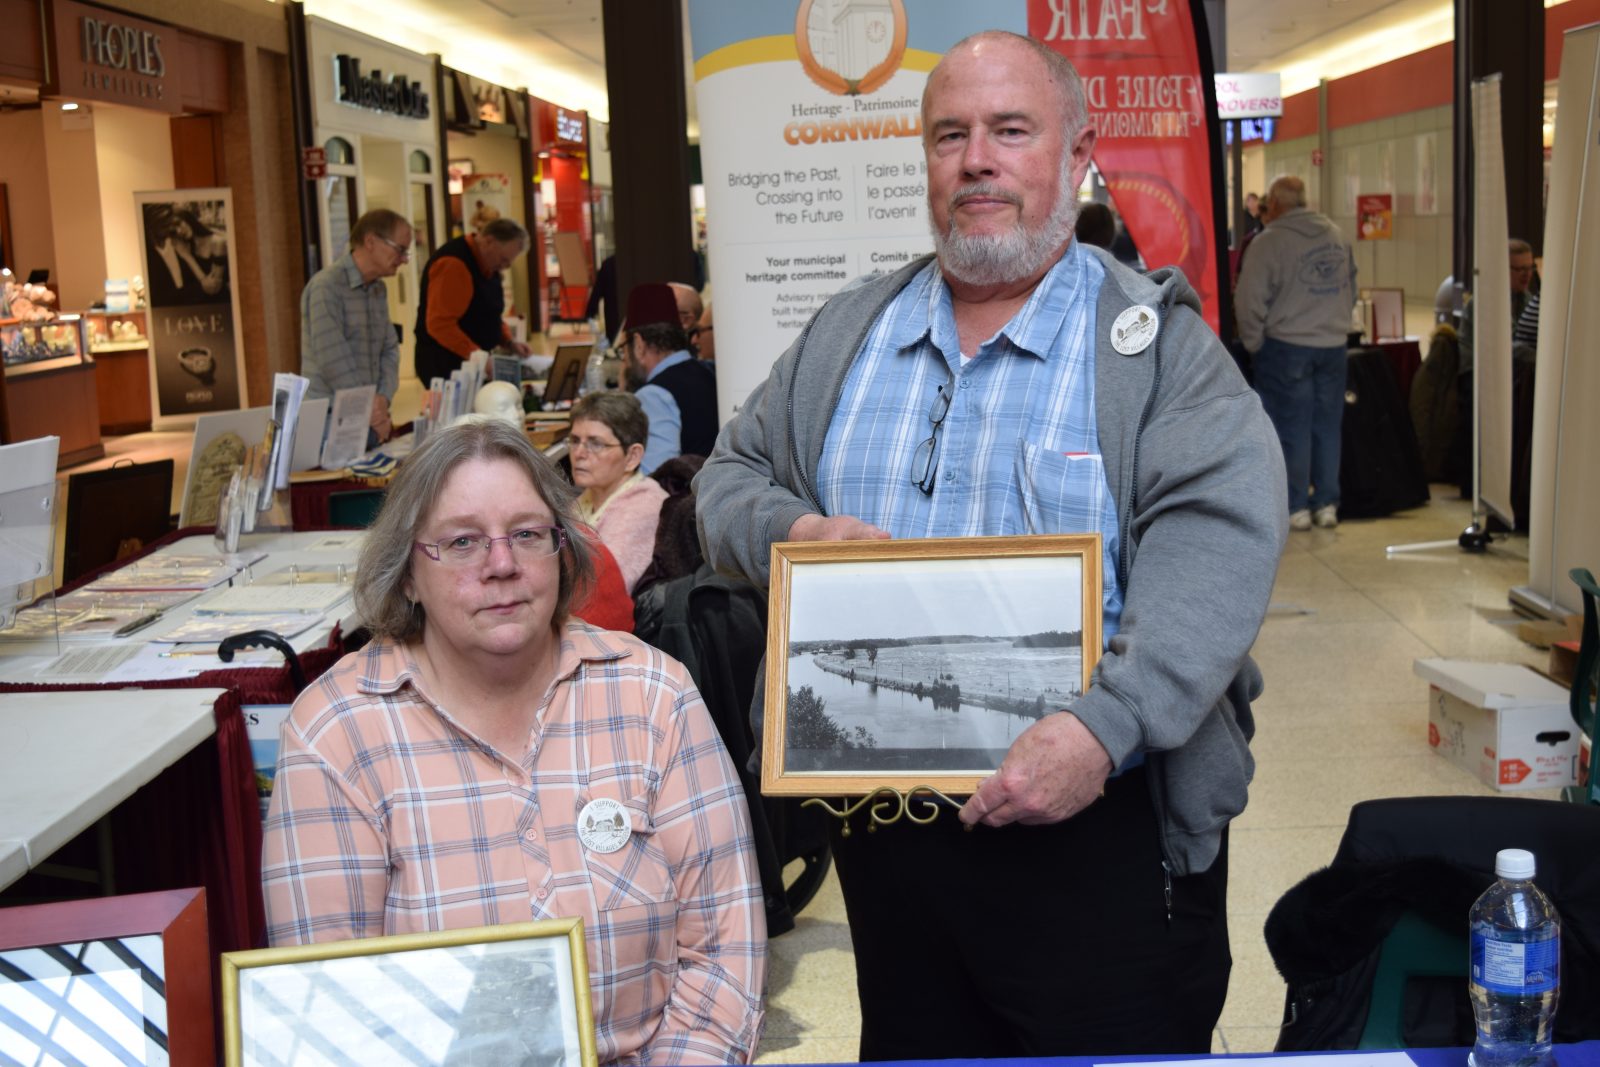 United Counties heritage on display at Cornwall Square